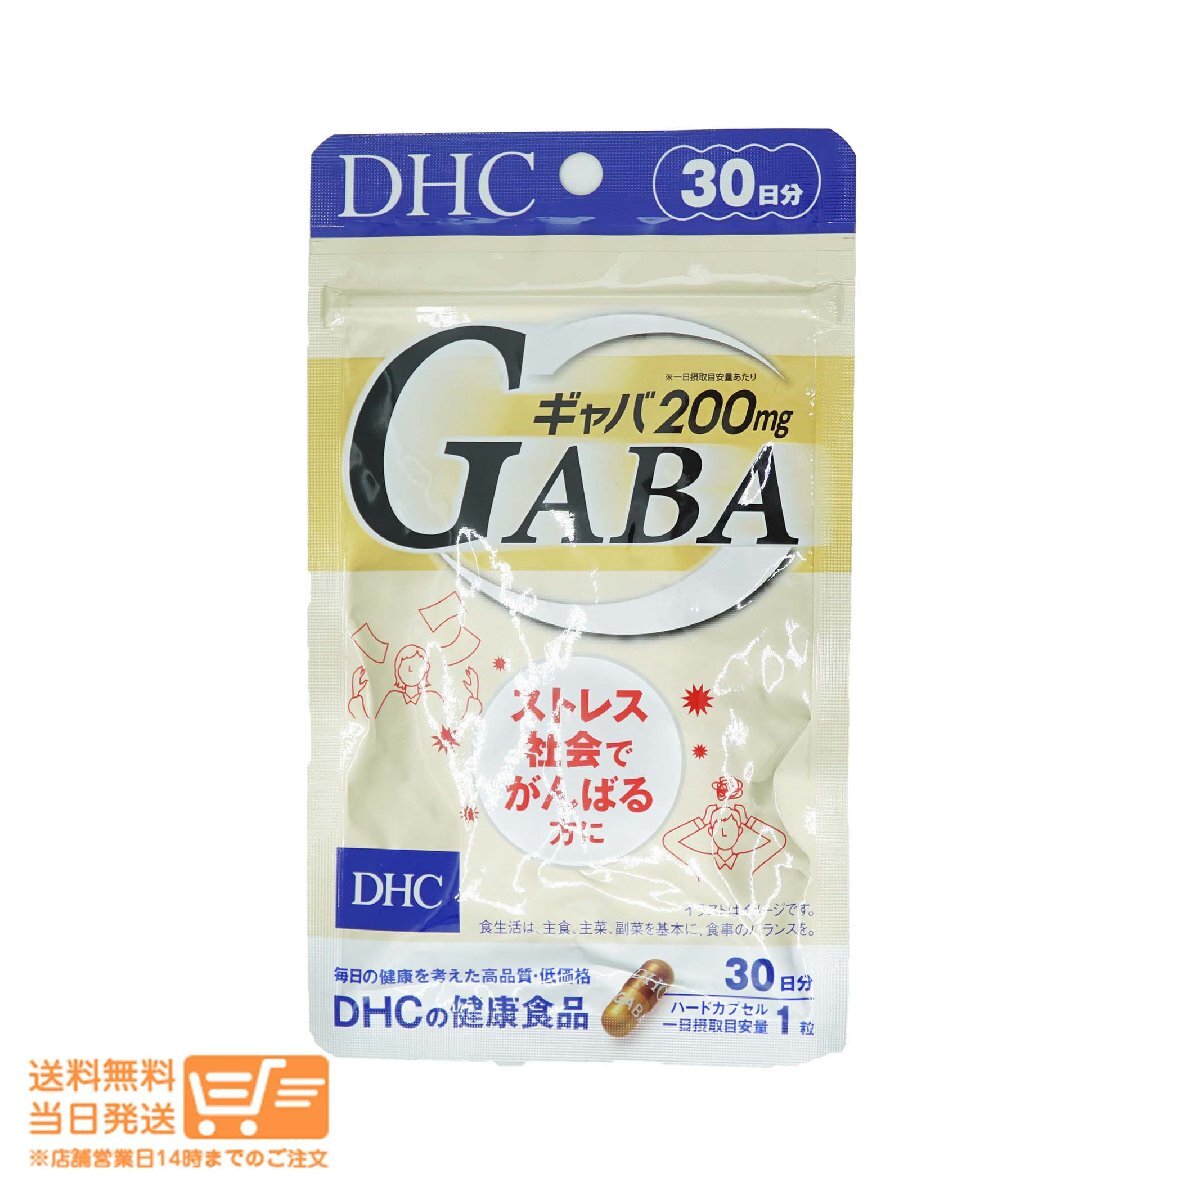 DHC supplement gyabaGABA 30 day minute free shipping 